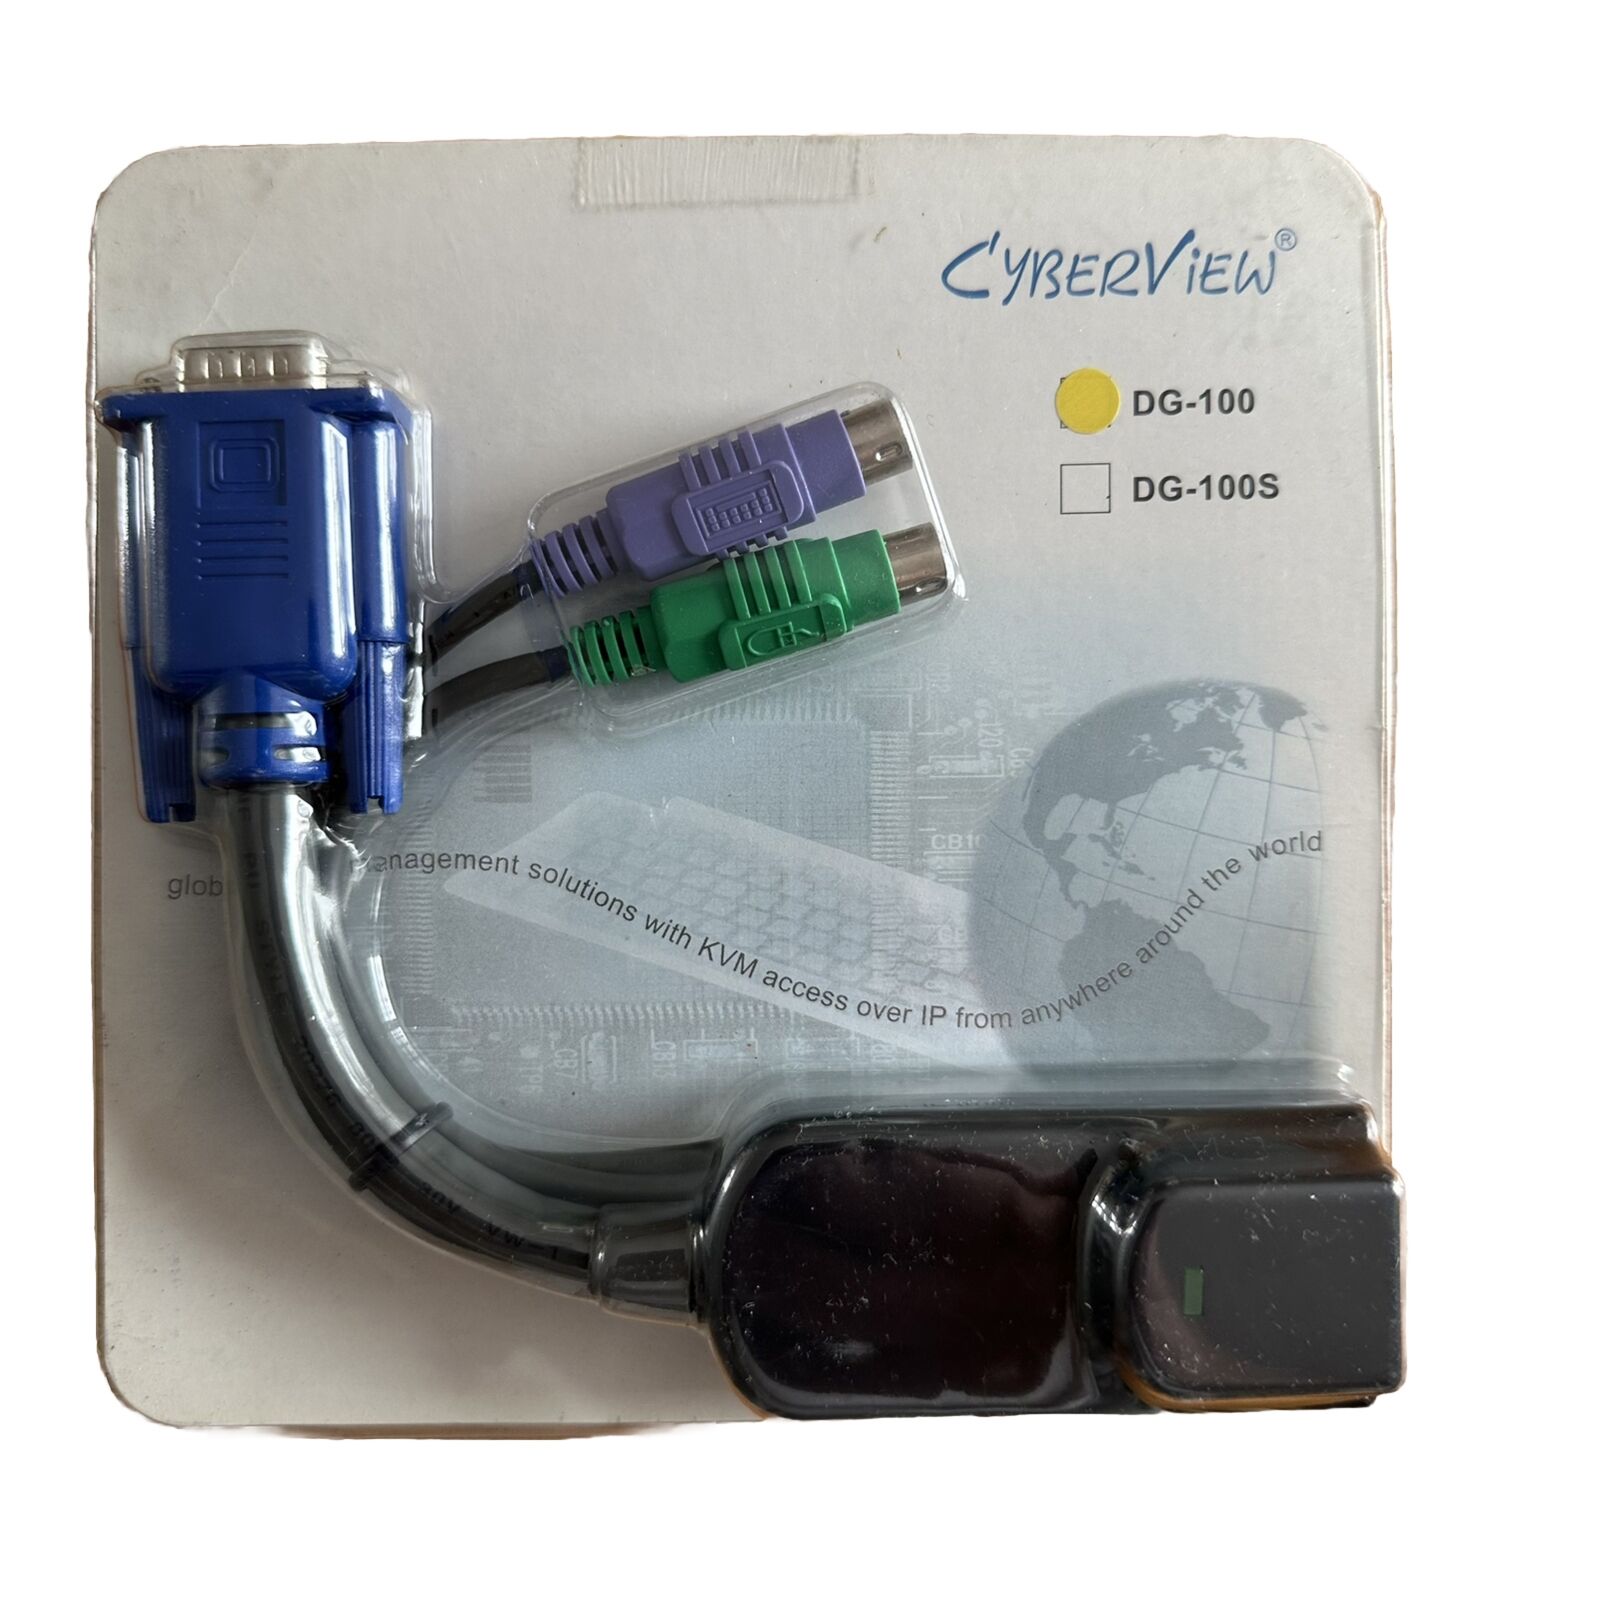 DG-100 Cyberview VGA PS2 Dongle for Cat5/Cat6